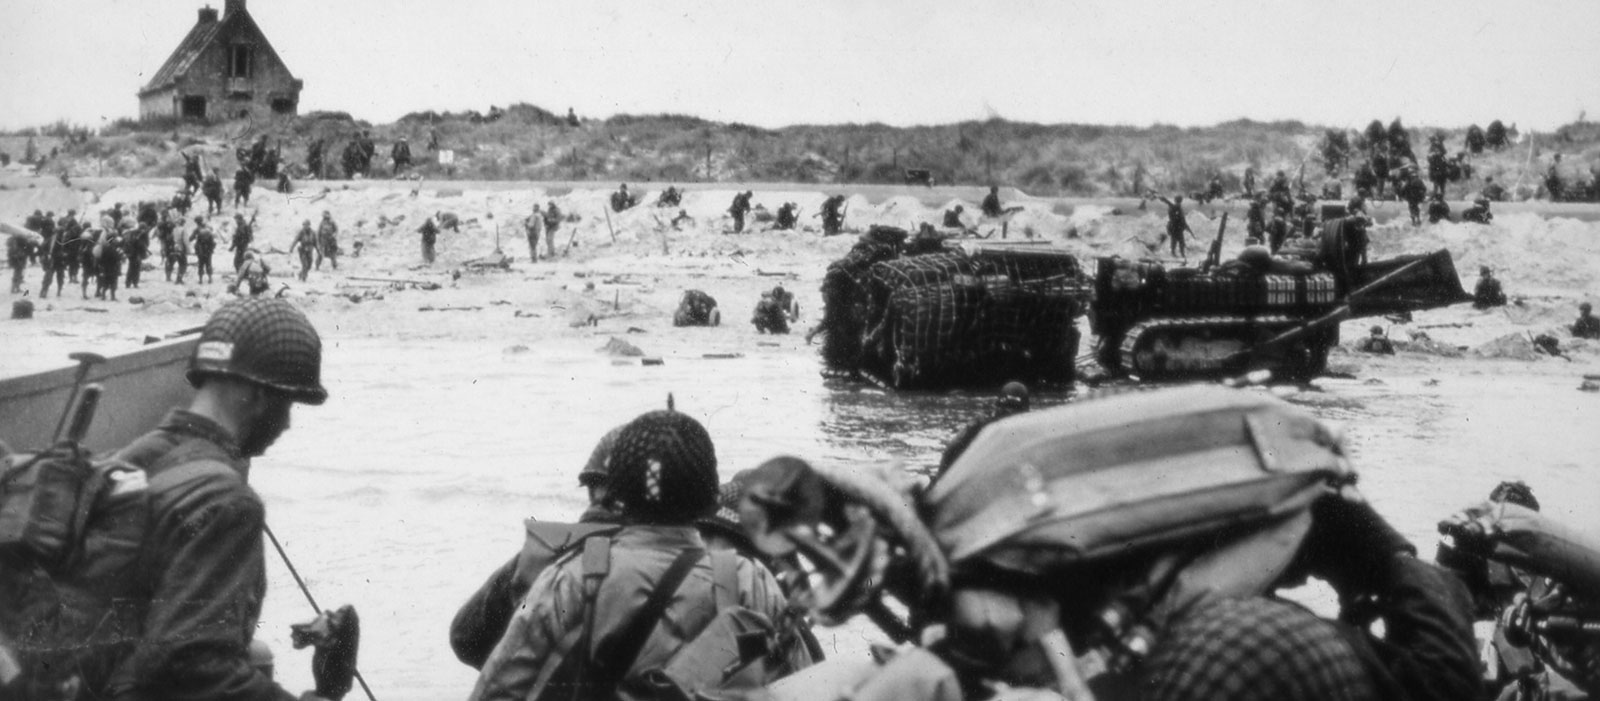 D-Day and The Normandy Campaign, The National WWII Museum